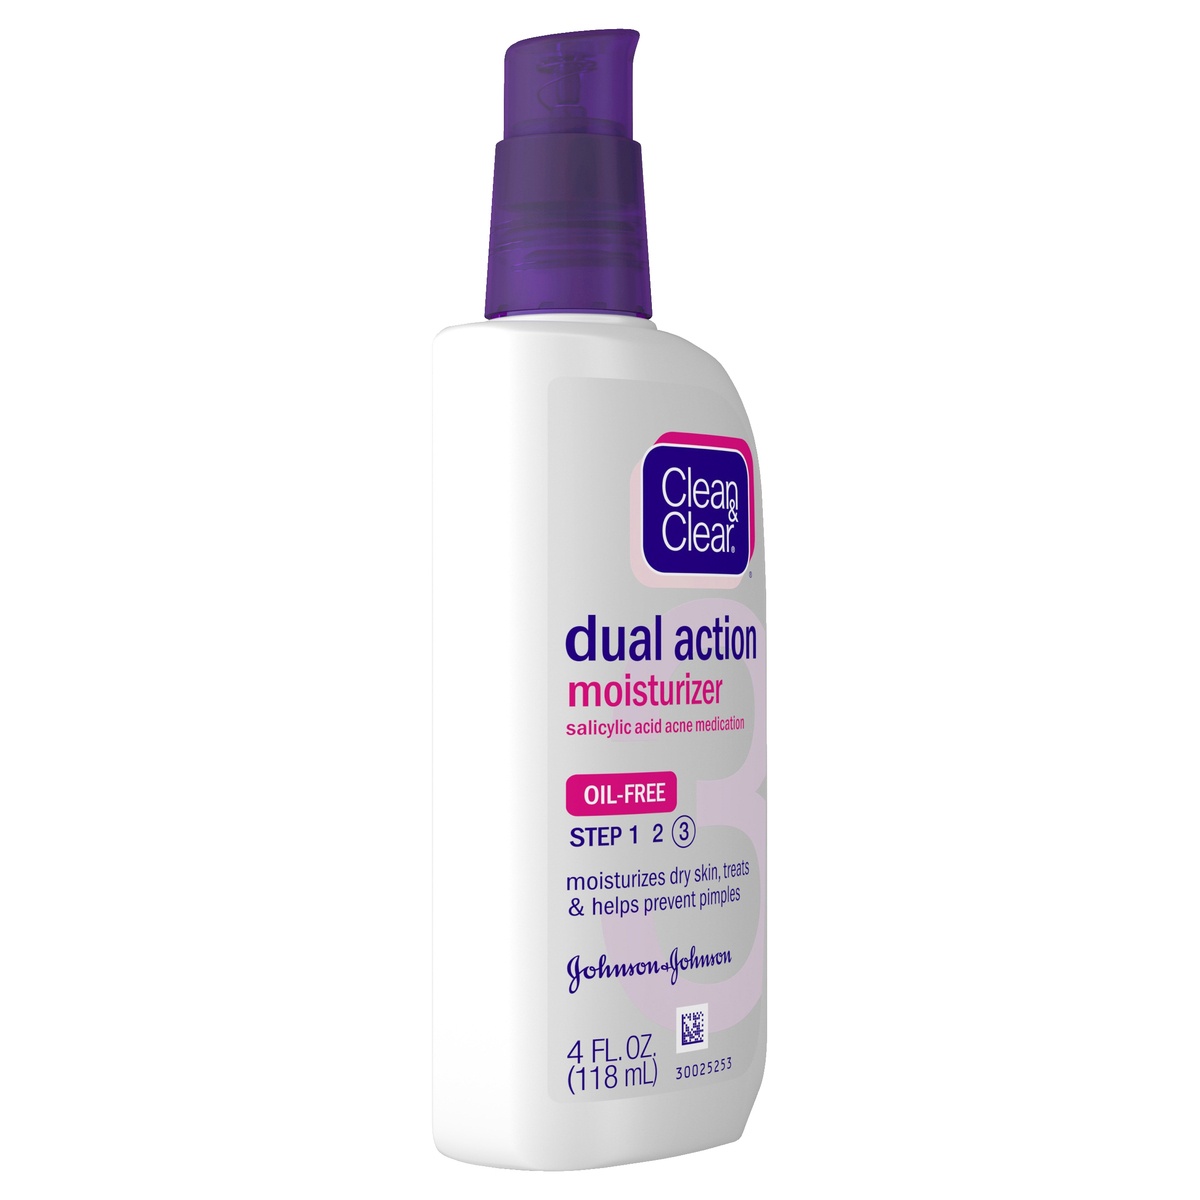 slide 8 of 8, Clean & Clear Essentials Dual Action Facial Moisturizer, 0.5% Salicylic Acid Acne Medication to Moisturize Dry Skin, Treat Acne & Help Prevent Pimples, Oil Free for Acne-Prone Skin, 4 fl oz